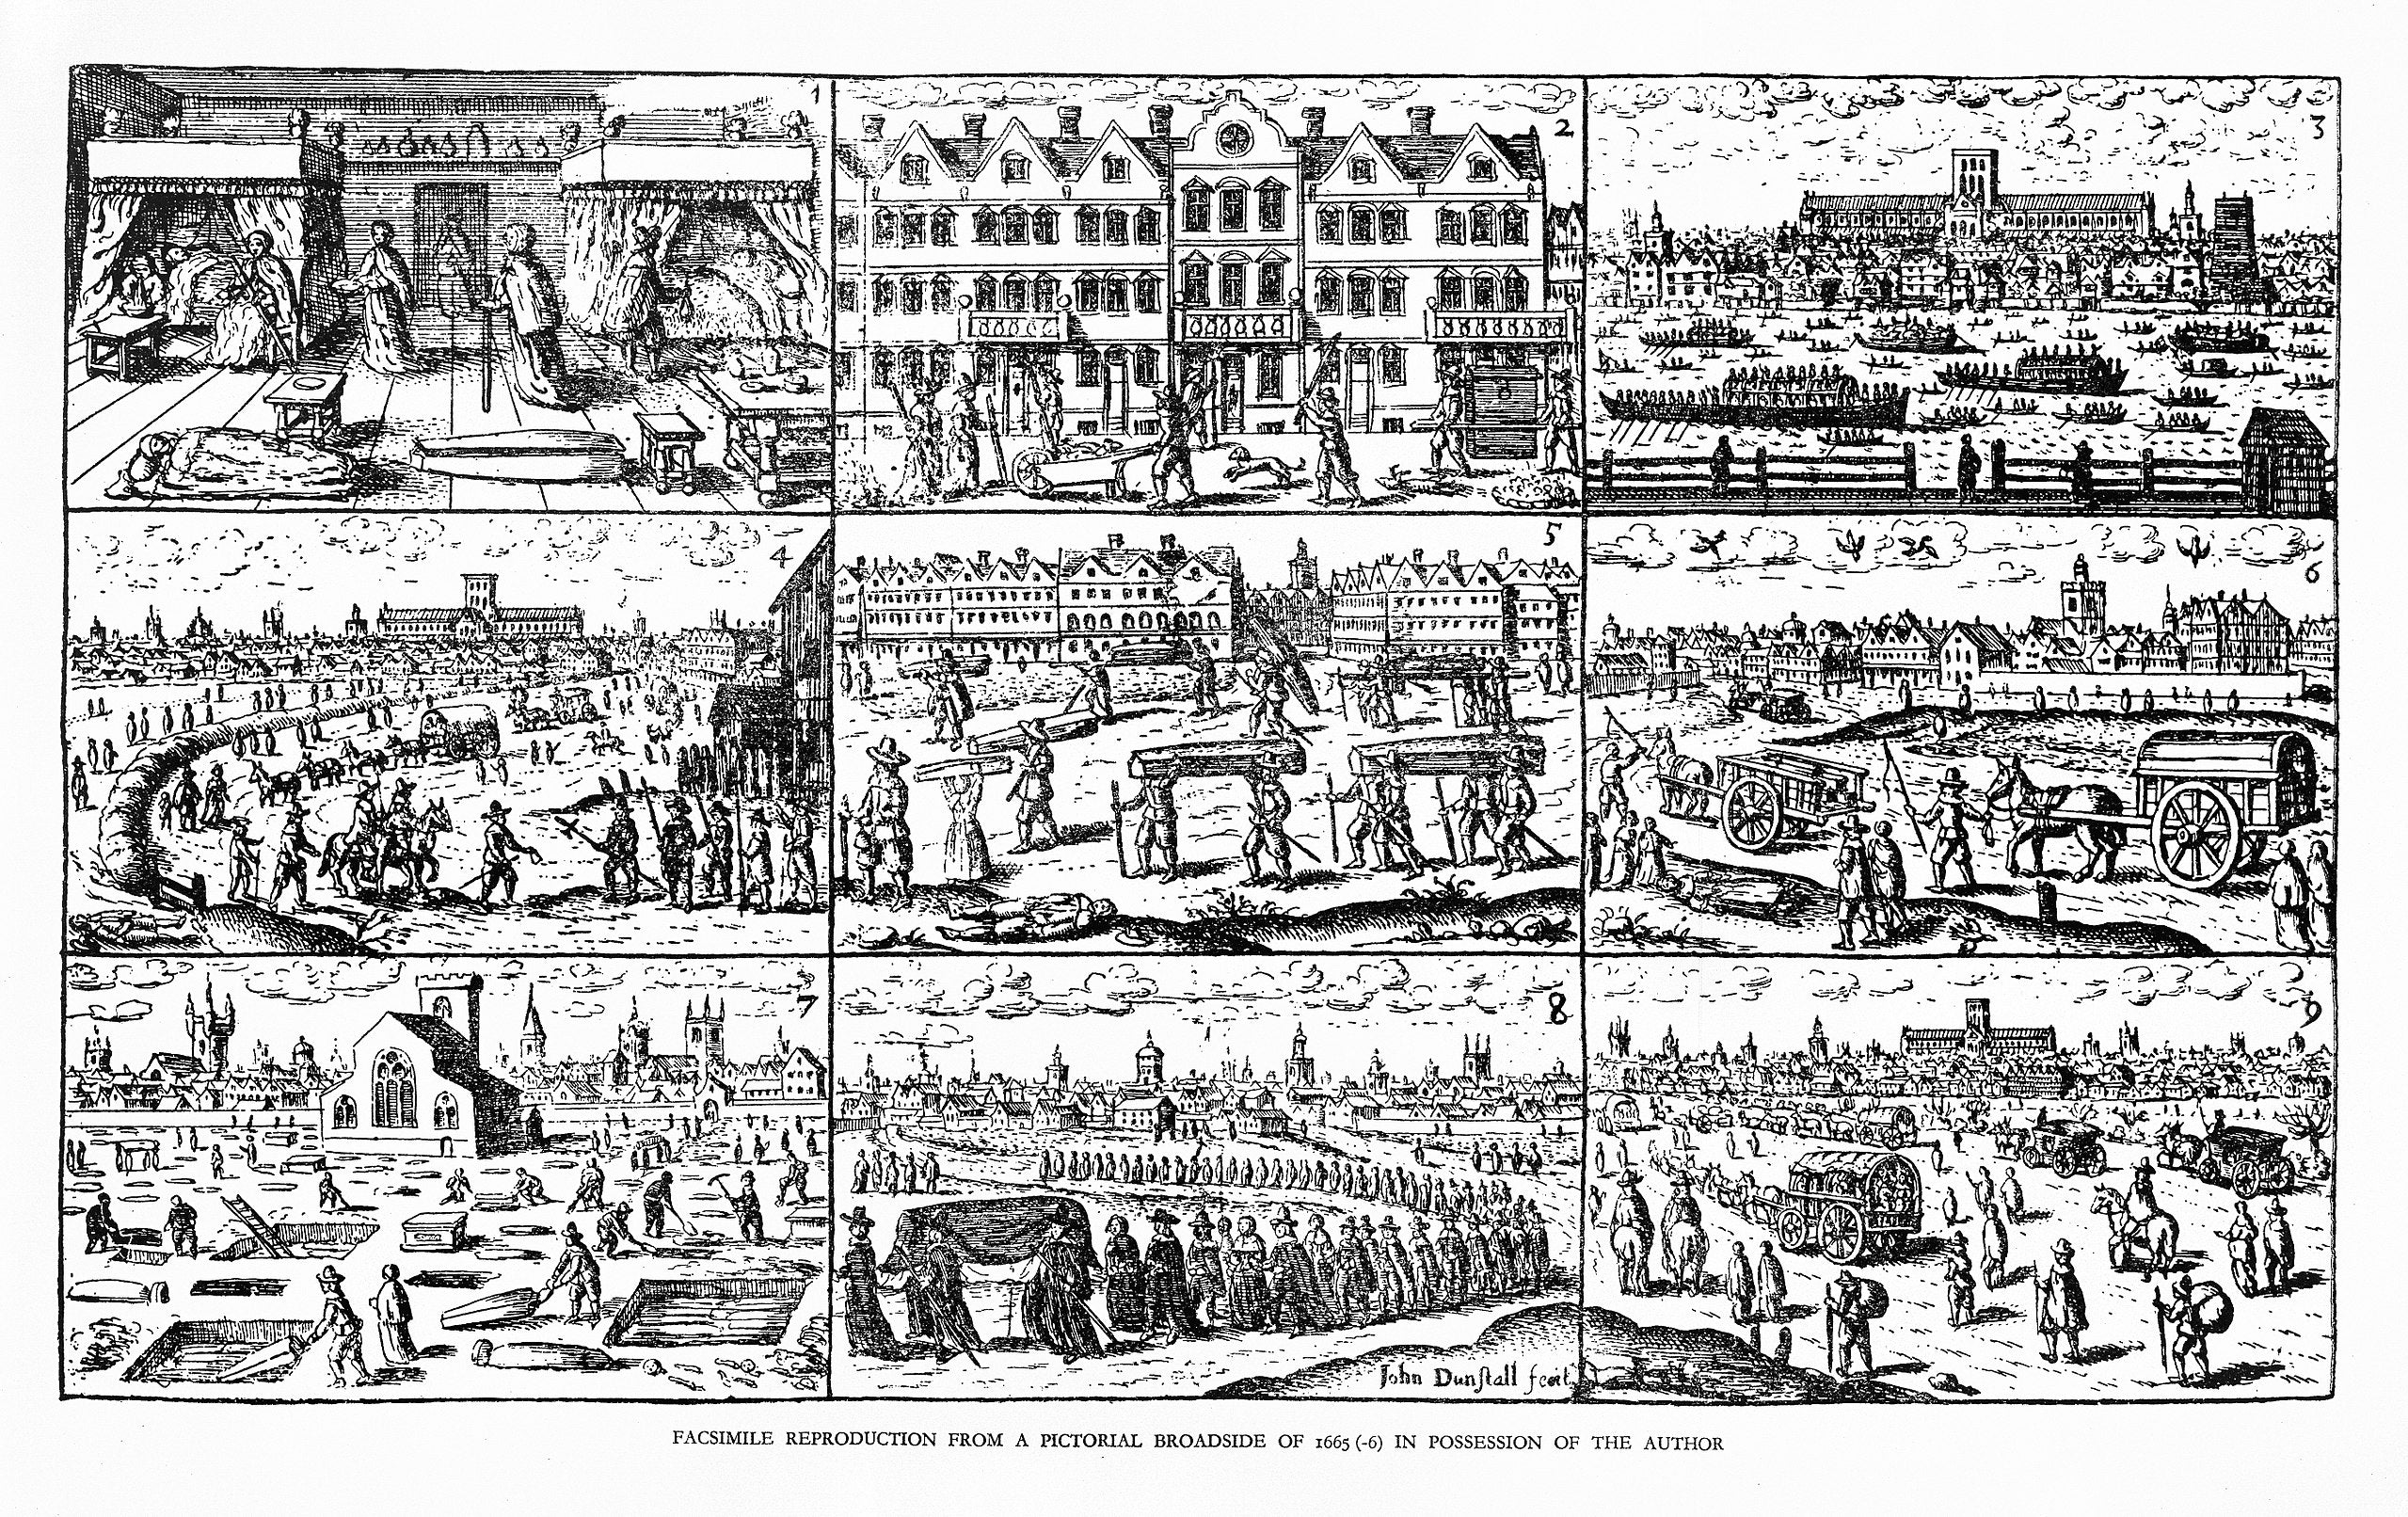 John Dunstall's depiction of London during the plague of 1665. Facsimile reproduction from a pictorial broadside of 1665-6